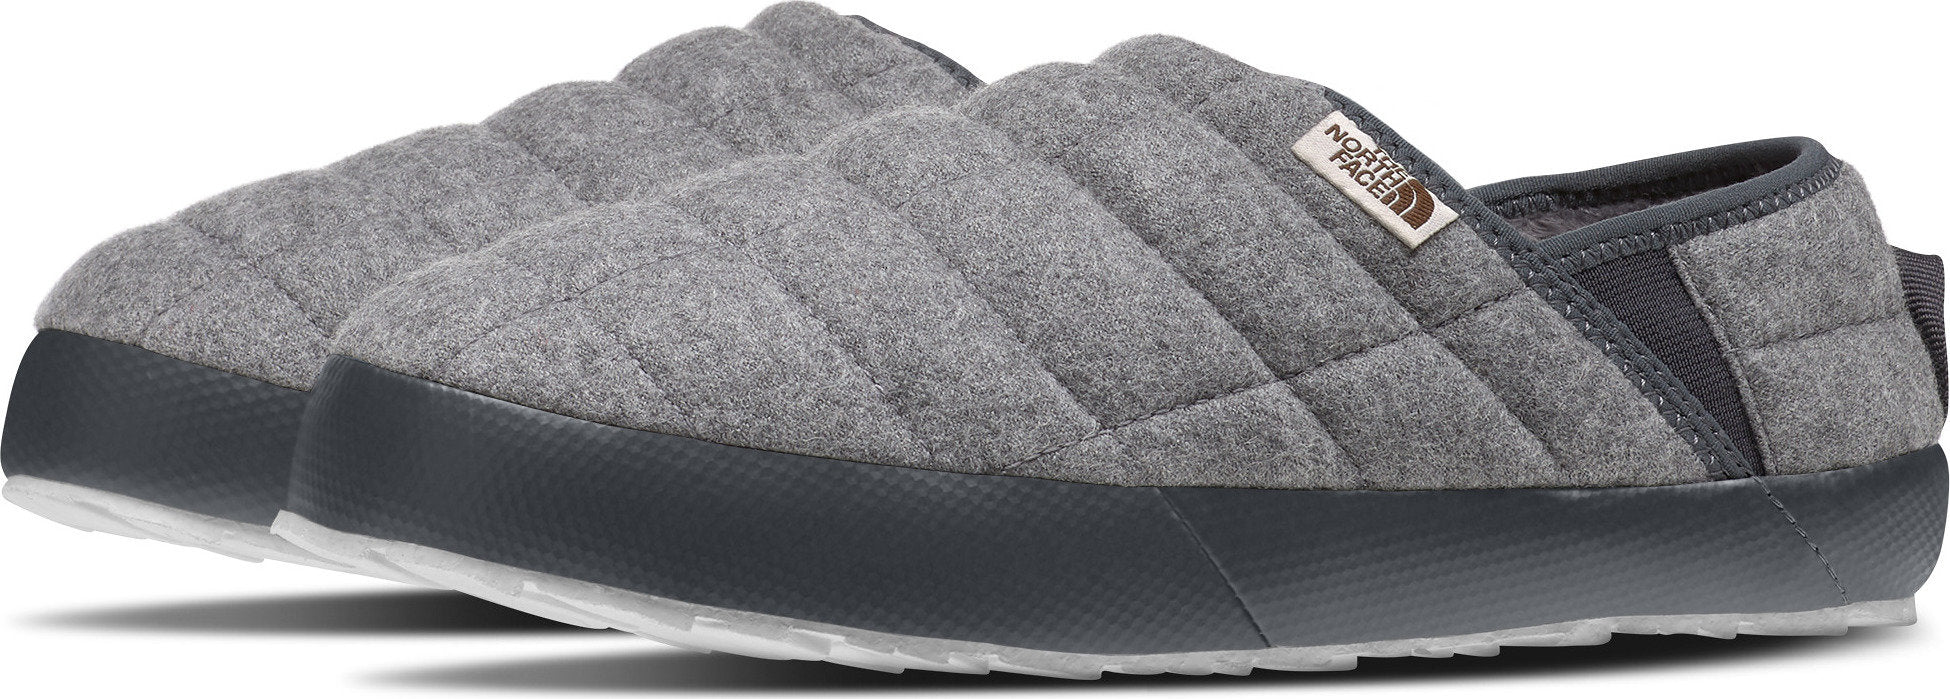 north face thermoball traction mule womens